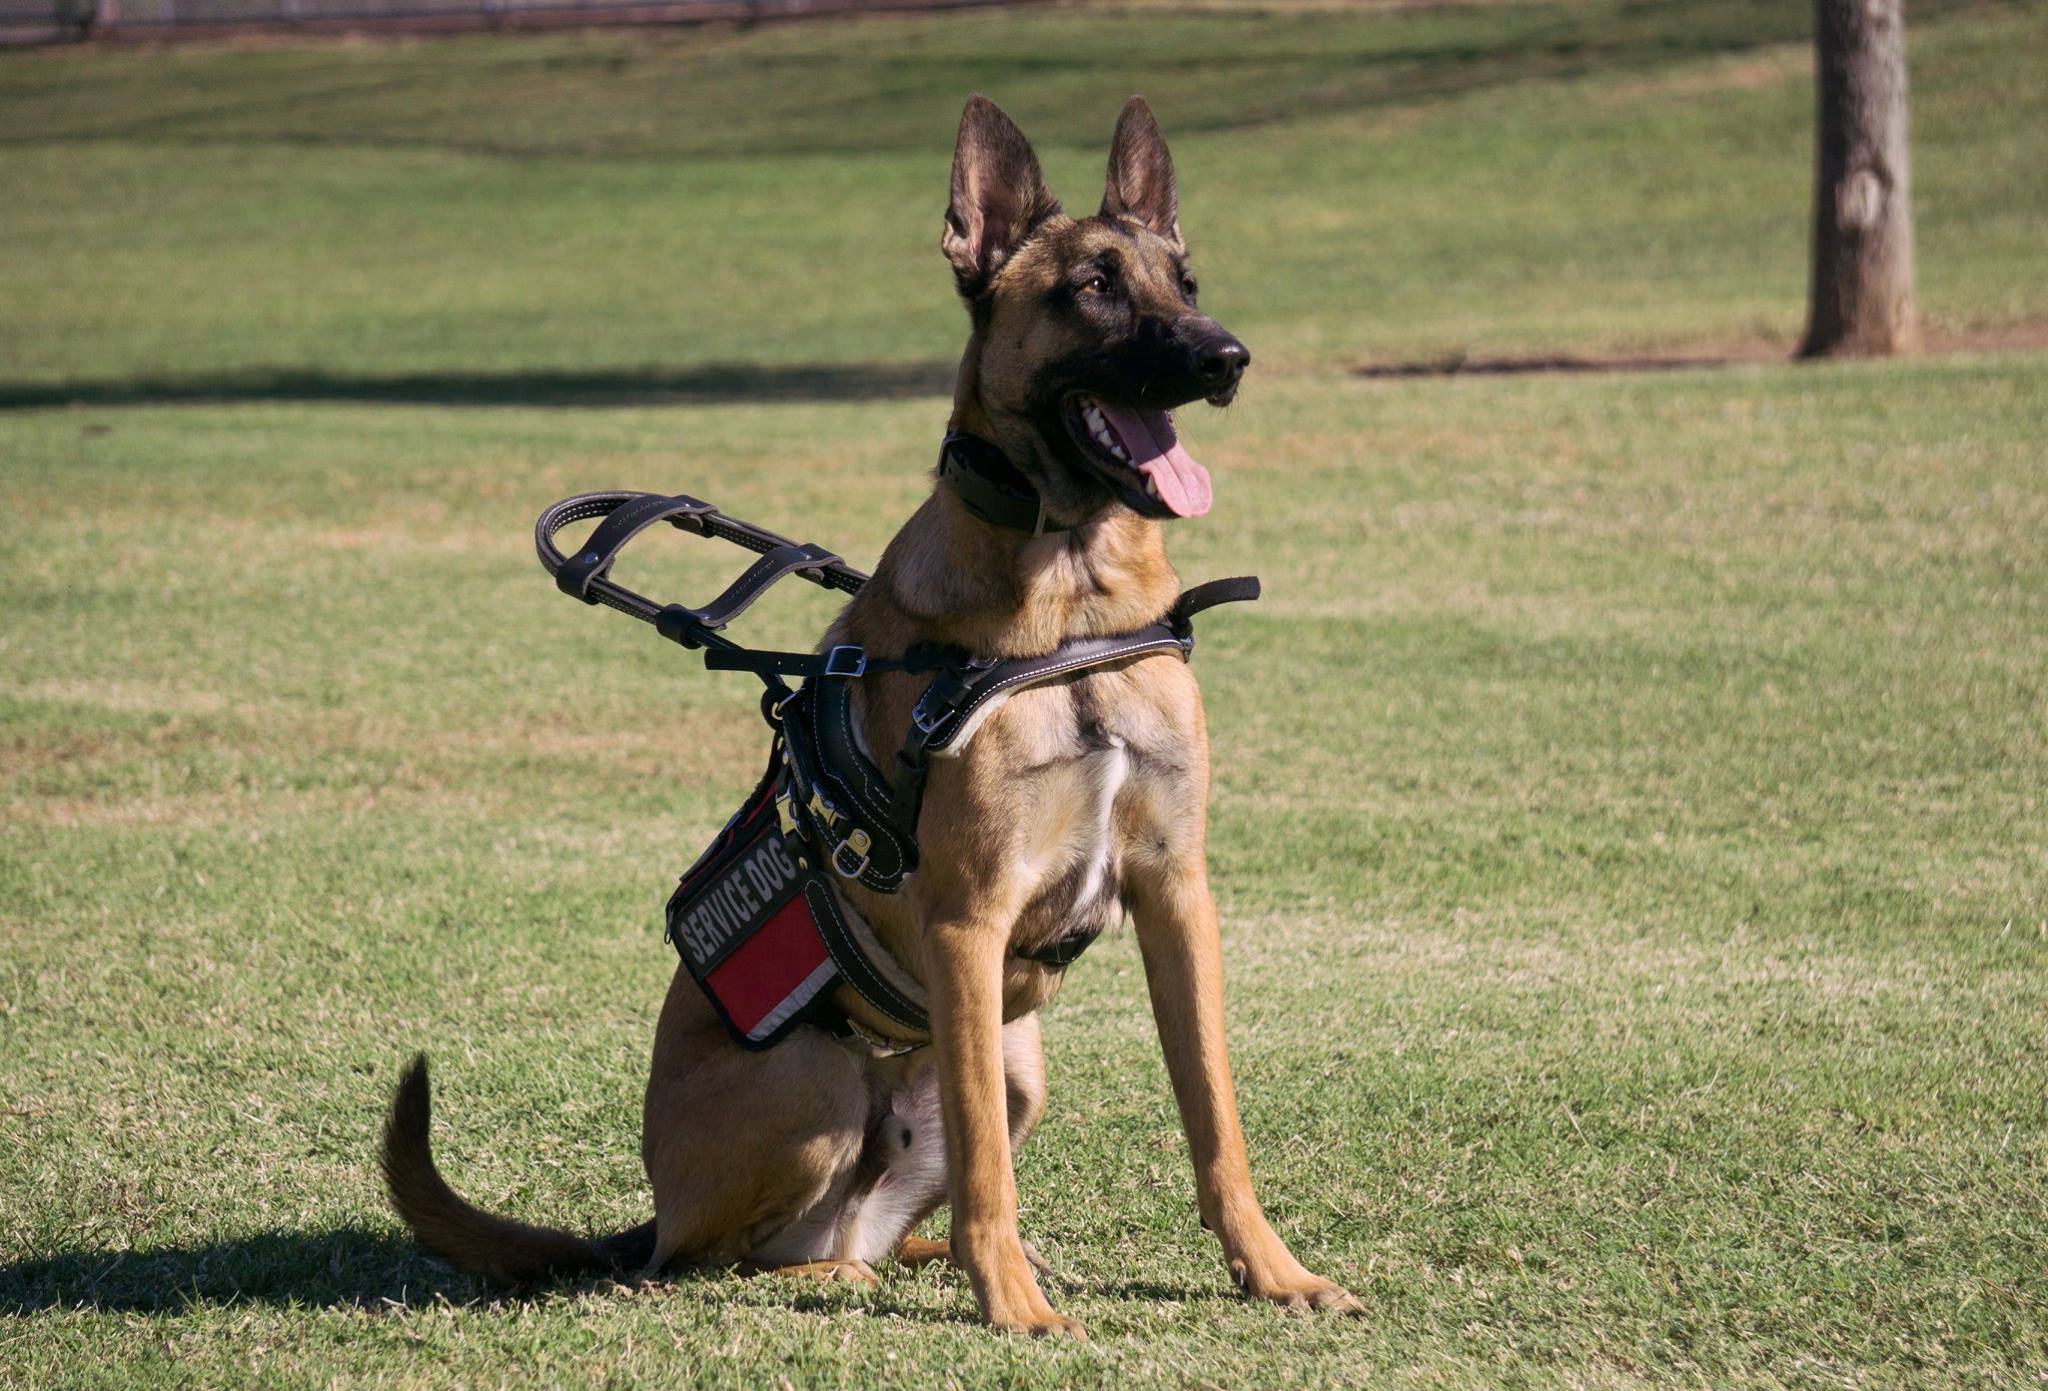 Spending Your Summer with a Service Dog in Orlando